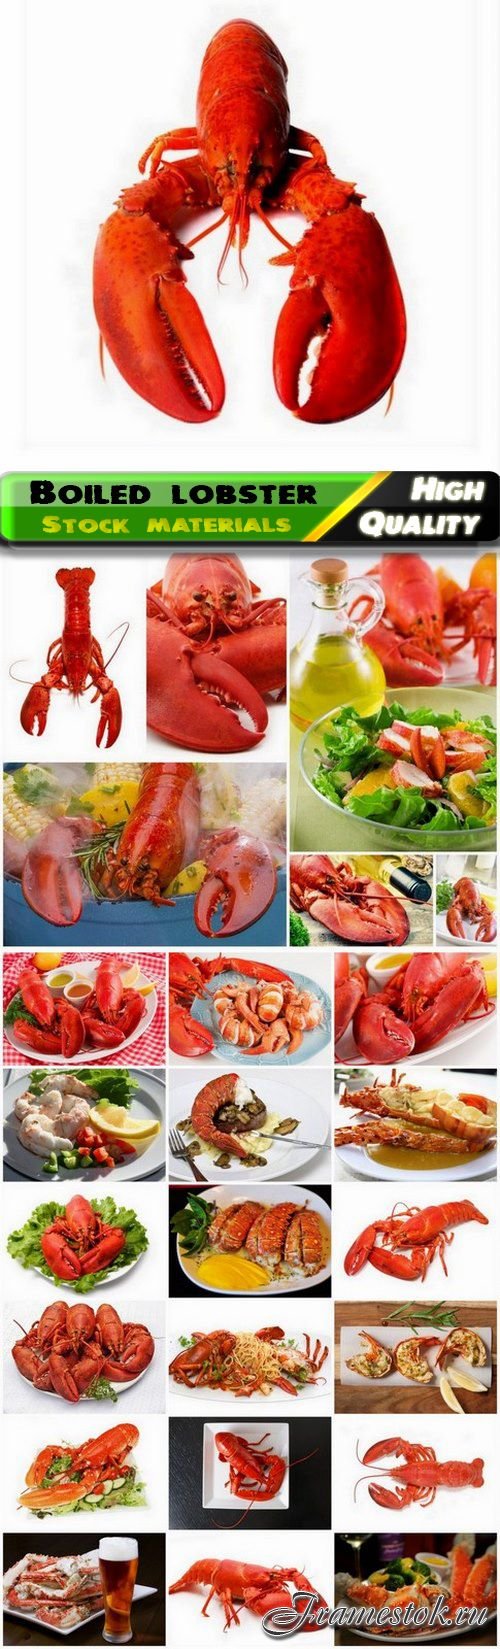 Boiled marine lobster and crayfish delicacy food - 25 HQ Jpg